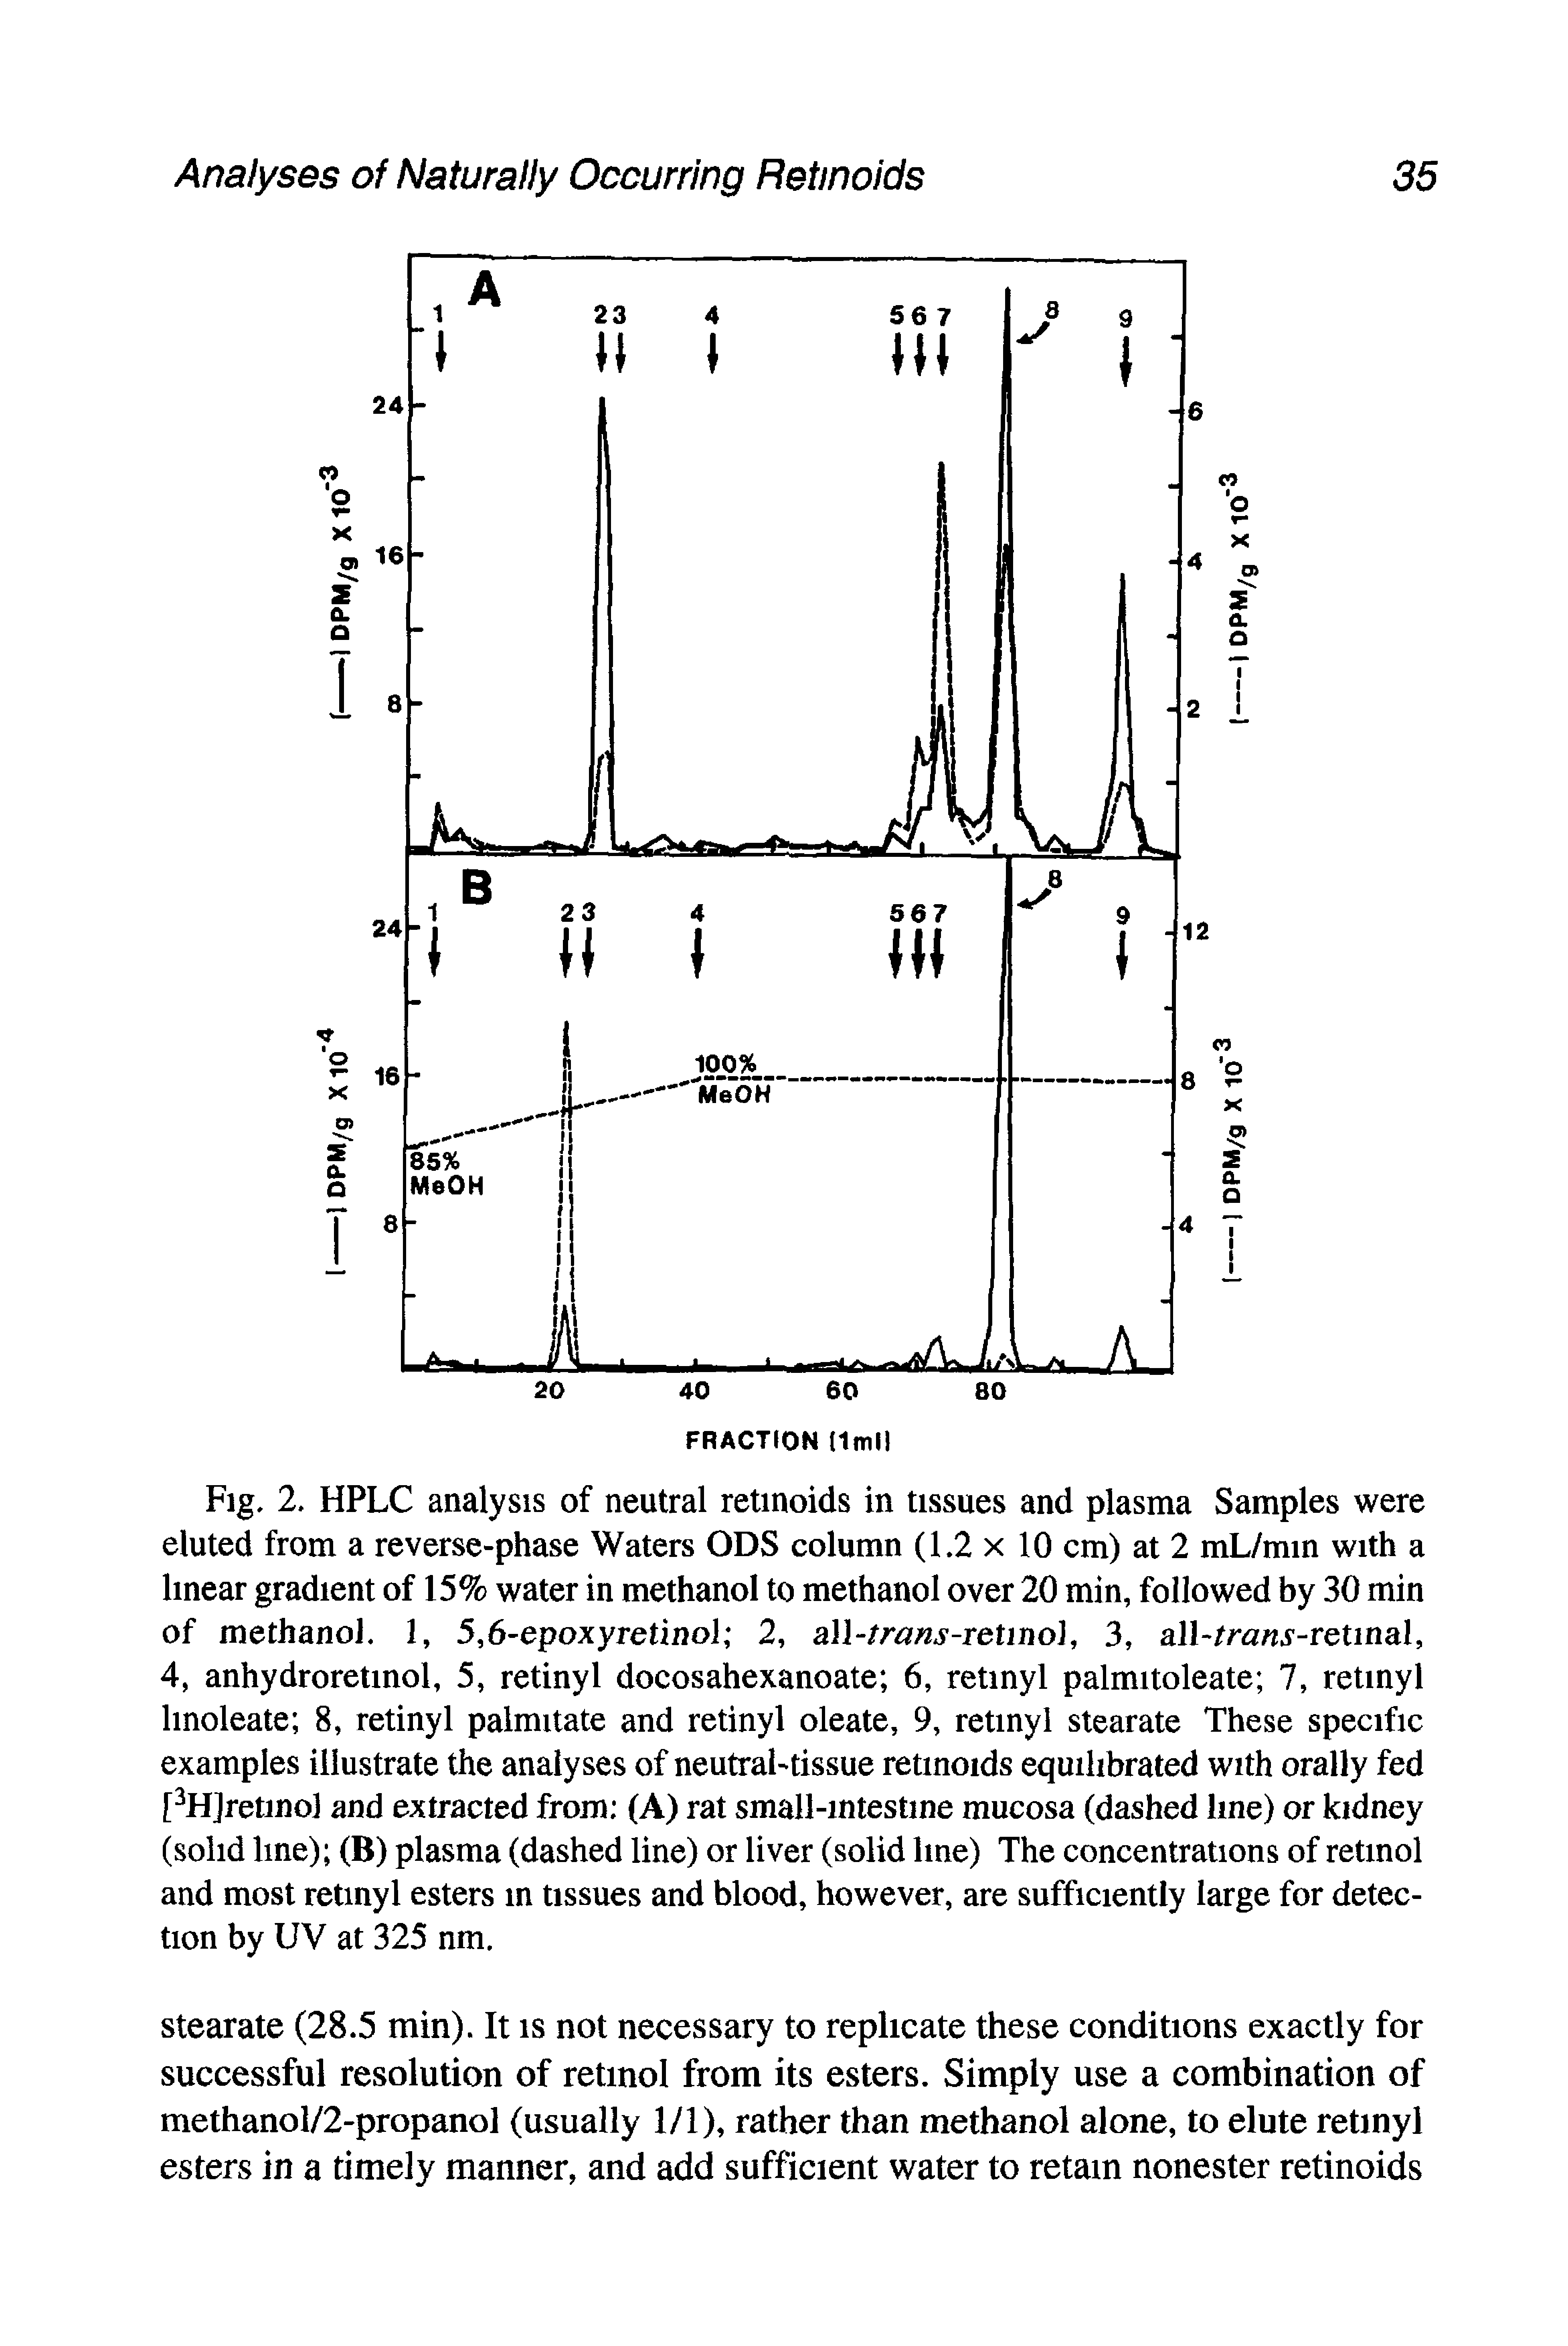 Fig. 2. HPLC analysis of neutral retinoids in tissues and plasma Samples were eluted from a reverse-phase Waters ODS column (1.2 x 10 cm) at 2 mL/min with a linear gradient of 15% water in methanol to methanol over 20 min, followed by 30 min of methanol. 1, 5,6-epoxyretinol 2, aU-trans-retinol, 3, all-/ra -retinal, 4, anhydroretinol, 5, retinyl docosahexanoate 6, retinyl palmitoleate 7, retinyl linoleate 8, retinyl palmitate and retinyl oleate, 9, retinyl stearate These specific examples illustrate the analyses of neutral-tissue retinoids equilibrated with orally fed [ HJretinol and extracted from (A) rat small-intestine mucosa (dashed line) or kidney (solid line) (B) plasma (dashed line) or liver (solid line) The concentrations of retinol and most retinyl esters in tissues and blood, however, are sufficiently large for detection by UV at 325 nm.